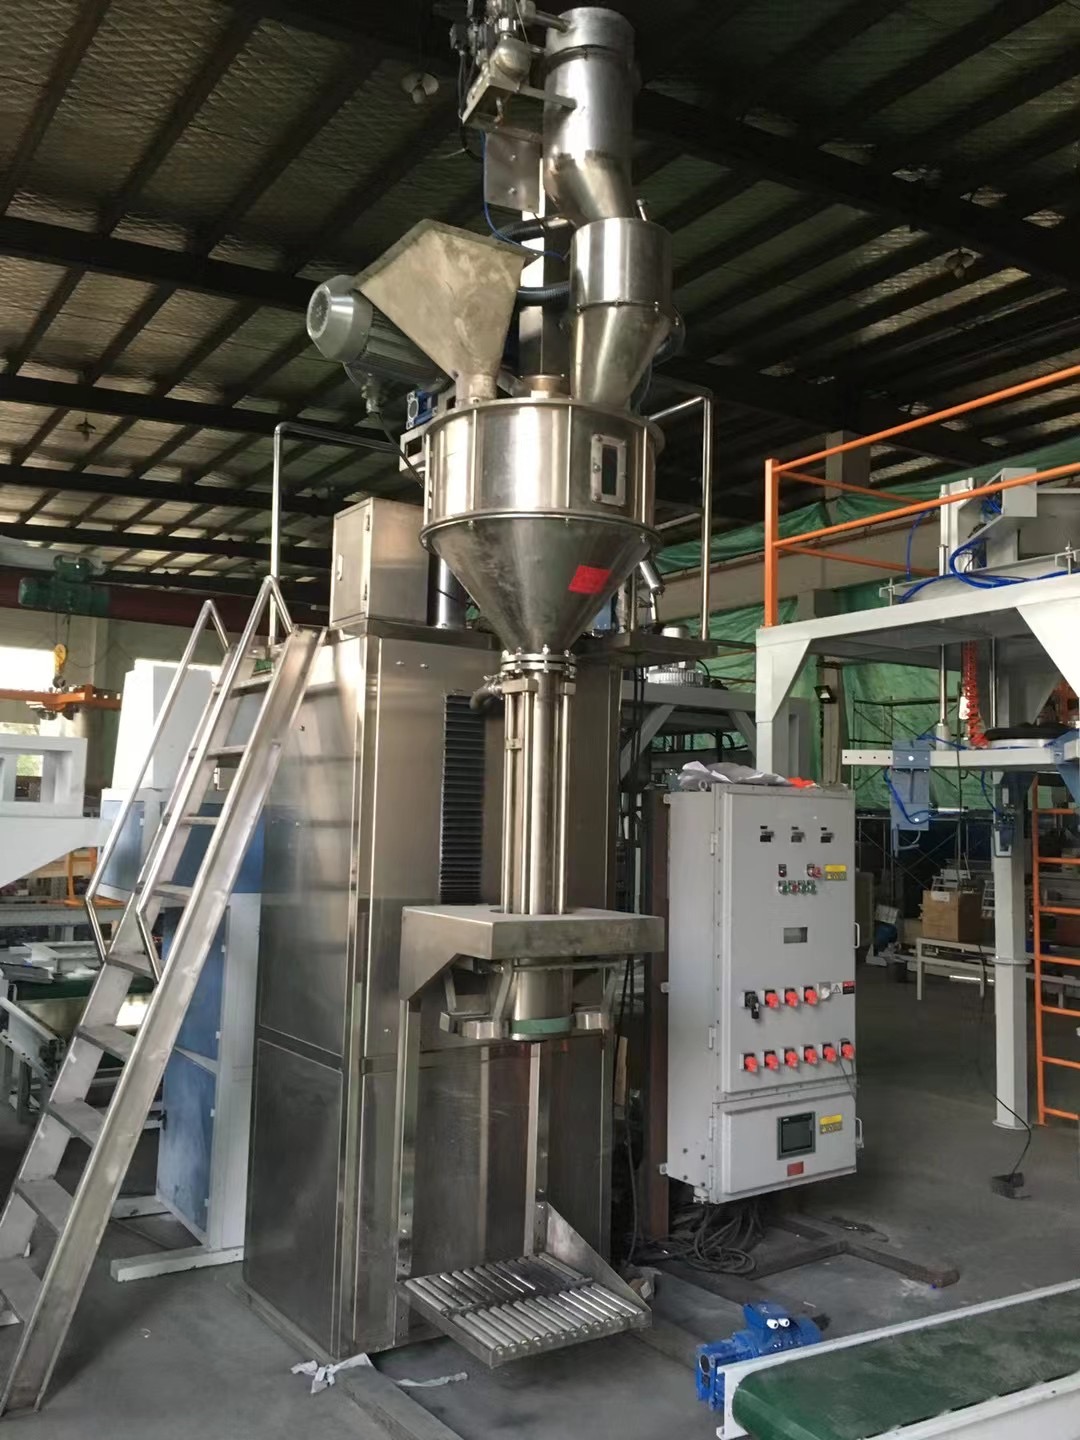 packing machine Calcium Carbonate bagging machine fully Automatic Packing Palletizing Line, Fully Automatic Packing Line, Fully Automatic Bagging Line, Fully Automatic filling and packaging line, auto